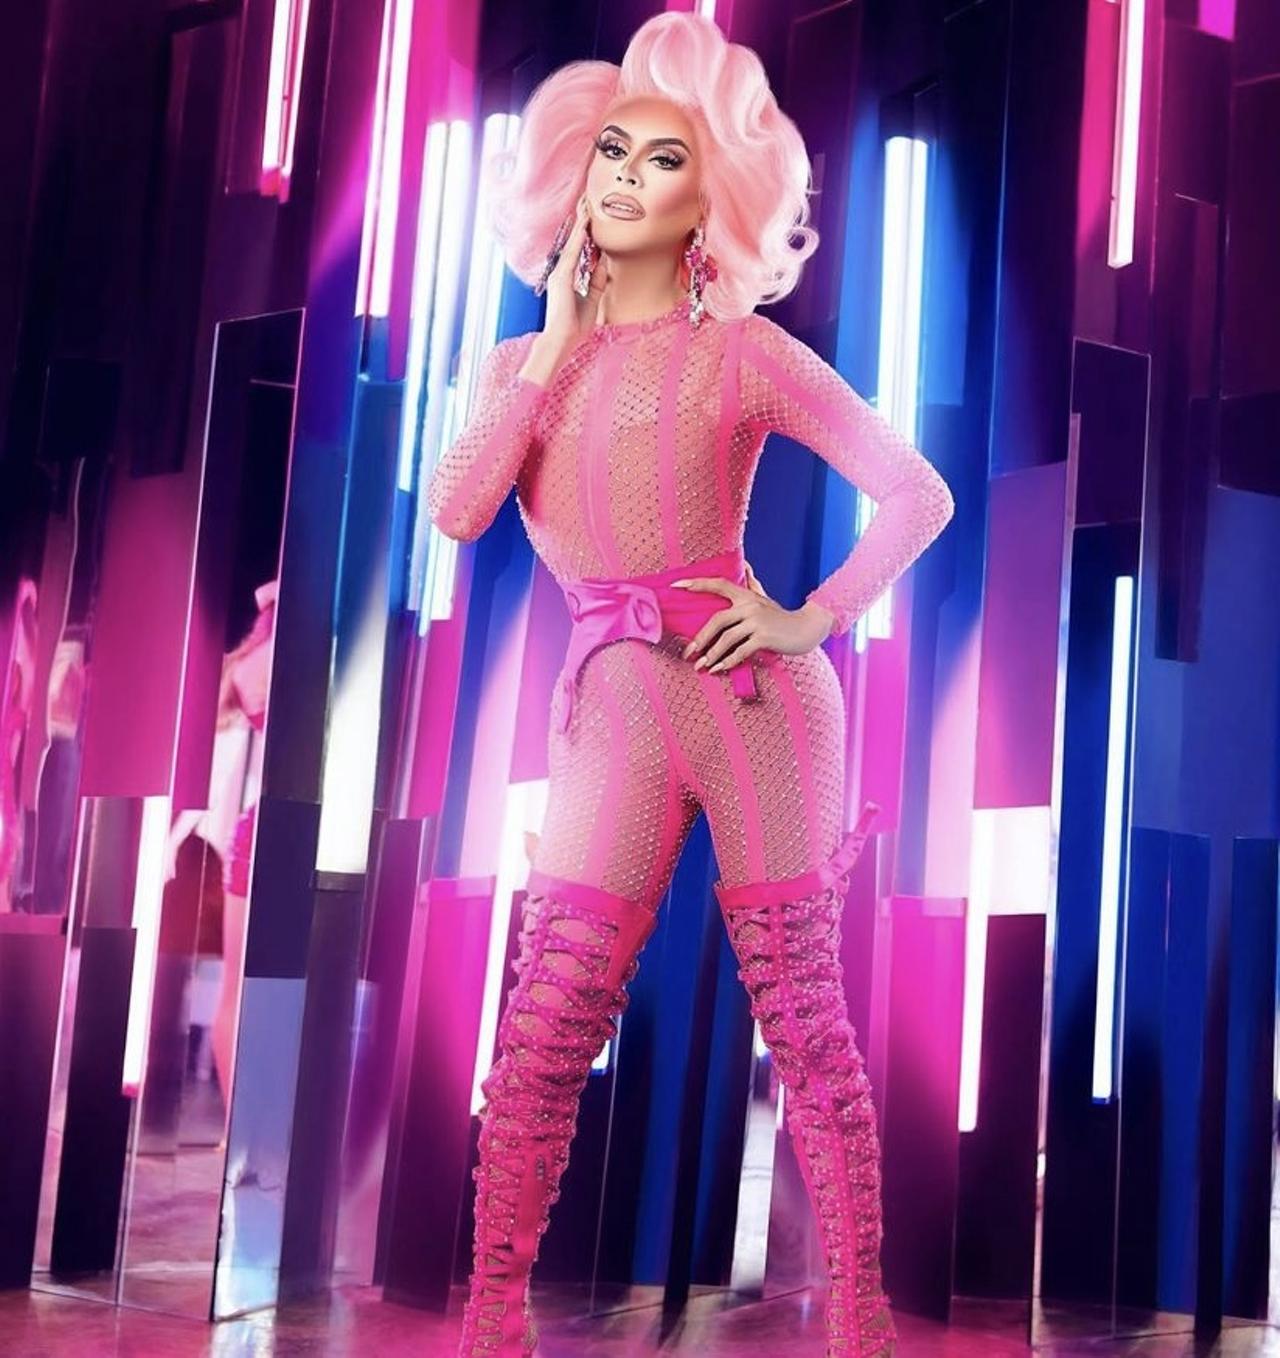 Cara Cavalli Andrews 
Orlando’s self-proclaimed pop princess, Andrews’ page showcases many of her looks inspired by pop artists such as  Miley Cyrus and Katy Perry. Her colorful wigs and outfits will always keep you refreshing her page for more content.
